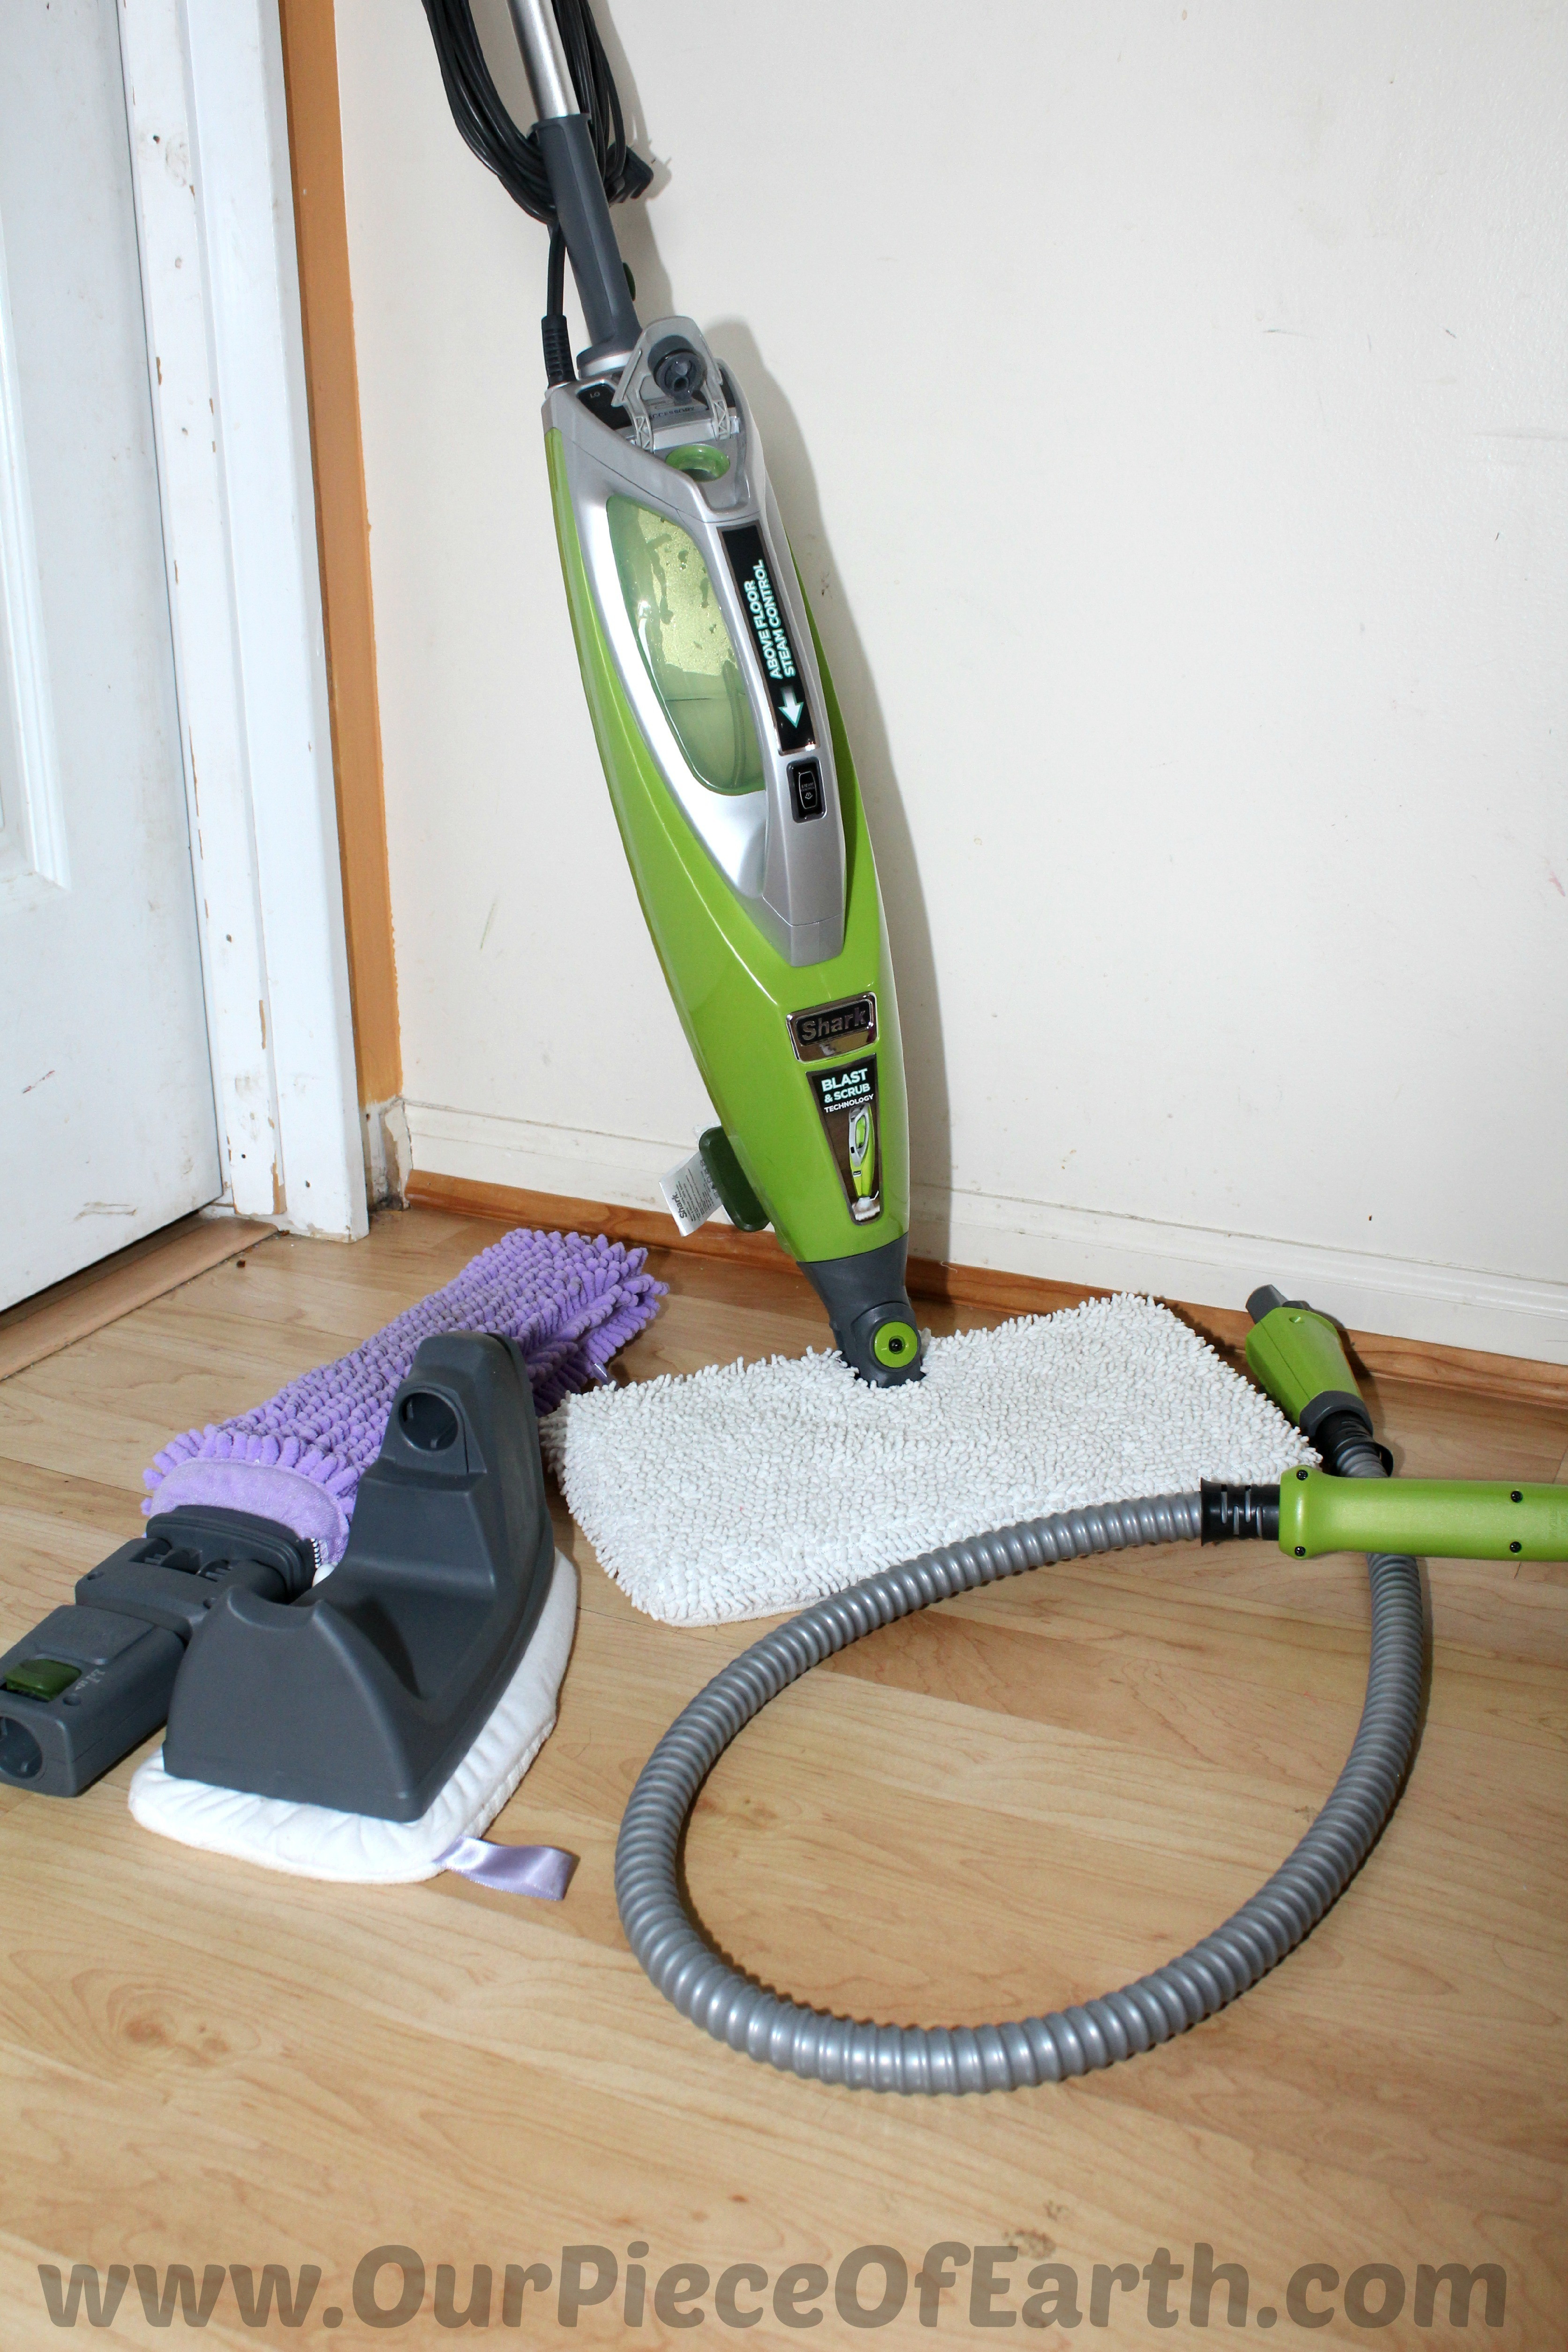 Hardwood Floor Care Of 19 Awesome Steam Clean Hardwood Floors Images Dizpos Com Intended for Steam Clean Hardwood Floors Best Of 30 New Pics Shark Steam Mop Hardwood Floors Pics Of